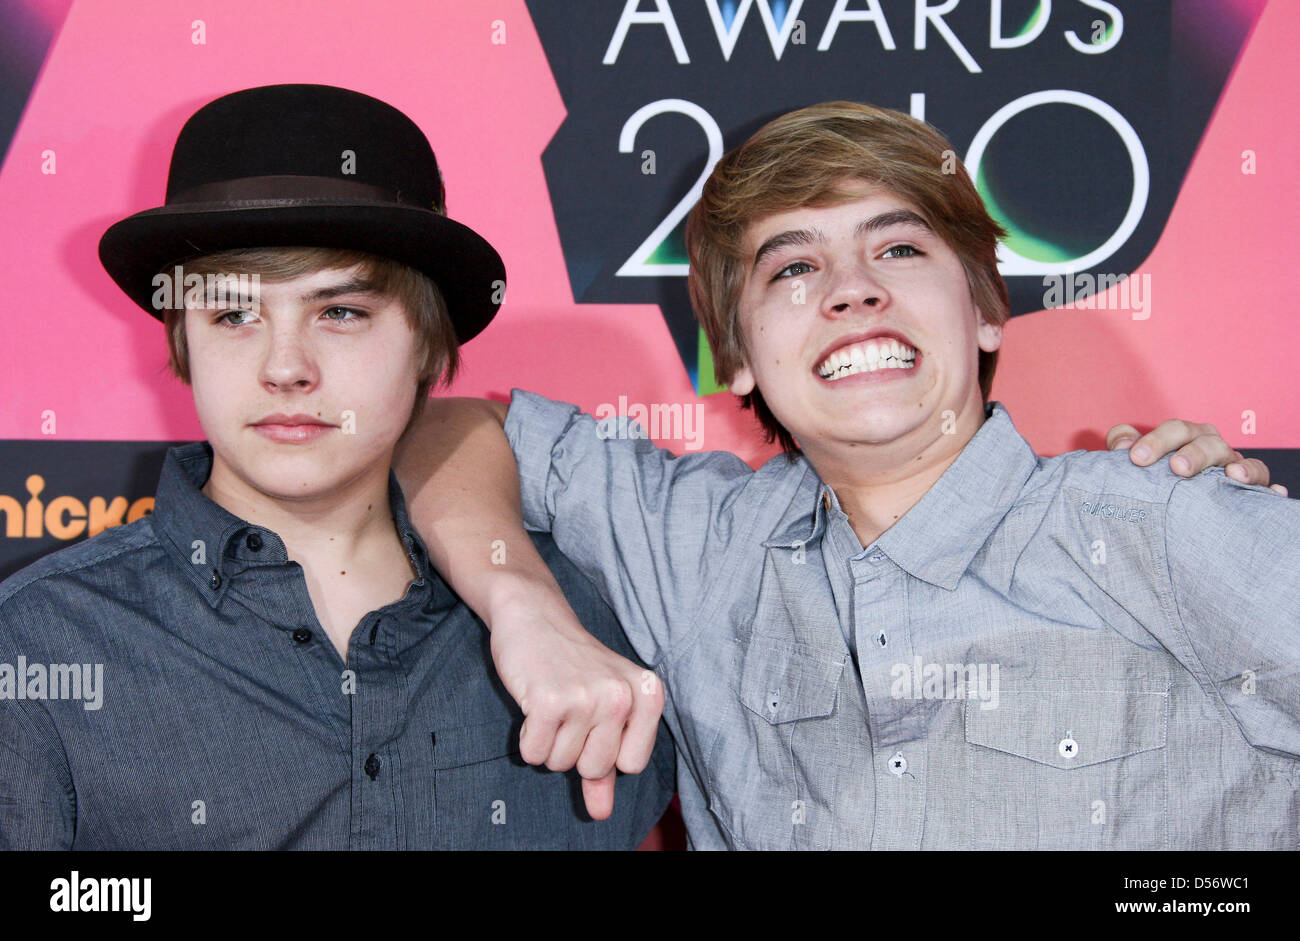 Actors and twins Cole Sprouse and Dylan Sprouse arrive at Nickelodeon's 23rd Annual Kids' Choice Awards held at UCLA's Pauley Pavilion in Los Angeles, USA, 27 March 2010. Kids' top choices in television, movies, music and sports were revealed via winners' boxes that contained everything from a live animal, to a human hand, inflatable man and of course slime. Photo: Hubert Boesl Stock Photo